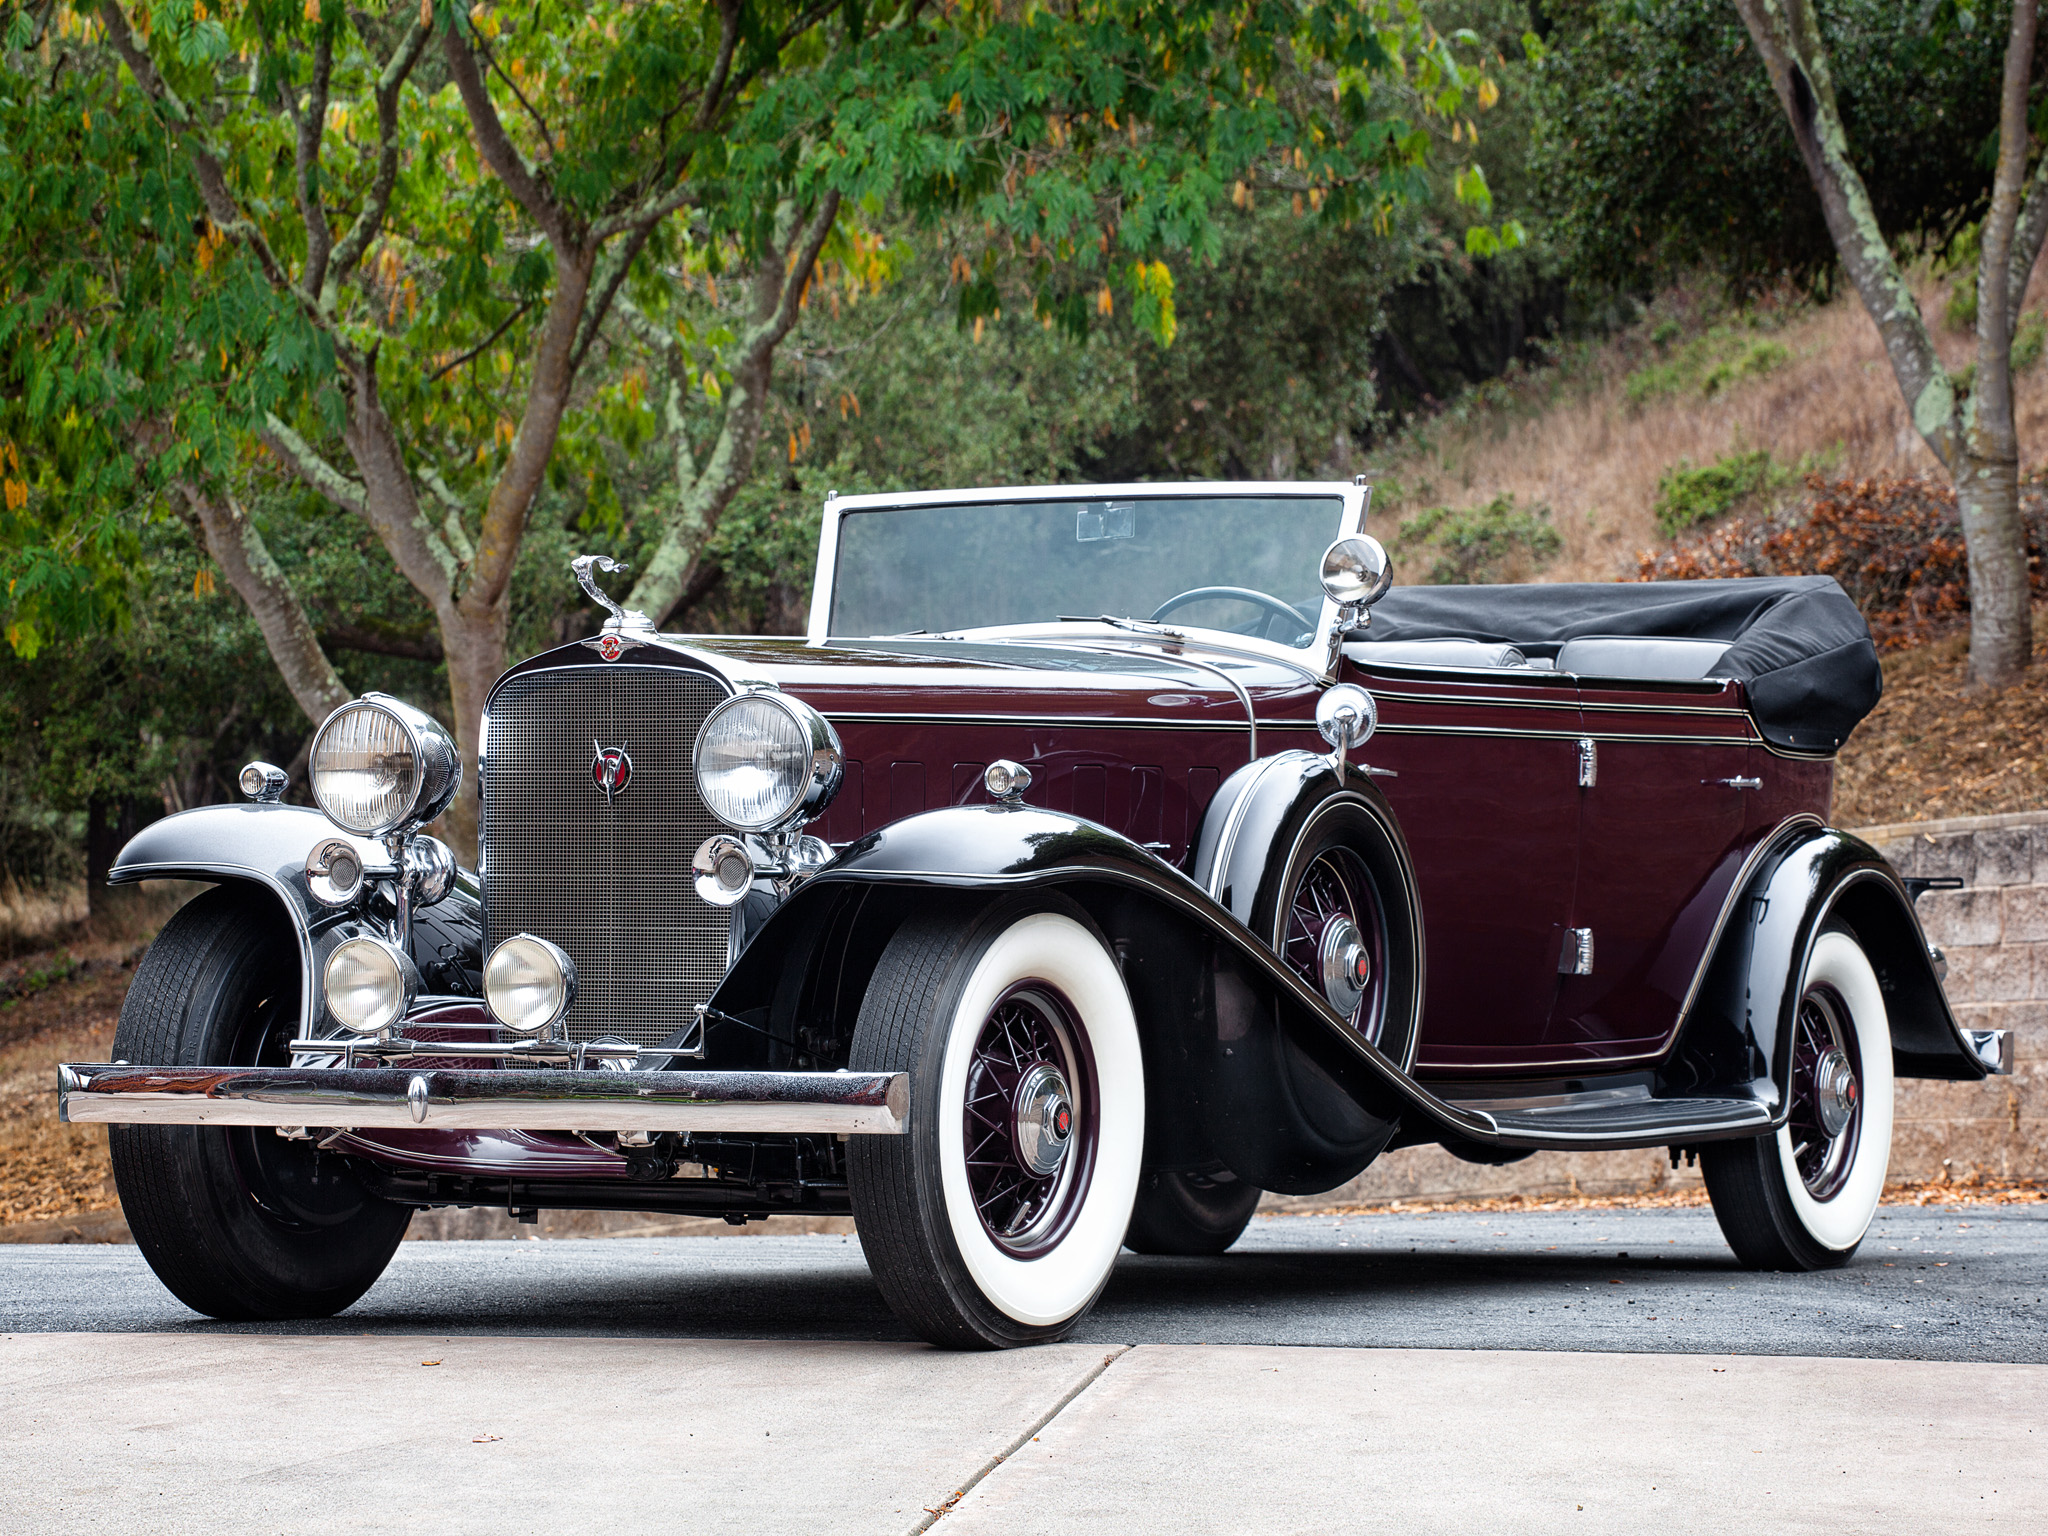 1932 Cadillac V16 452 B All Weather Phaeton By Fisher 32 16 273 Retro Luxury Wallpapers Hd Desktop And Mobile Backgrounds